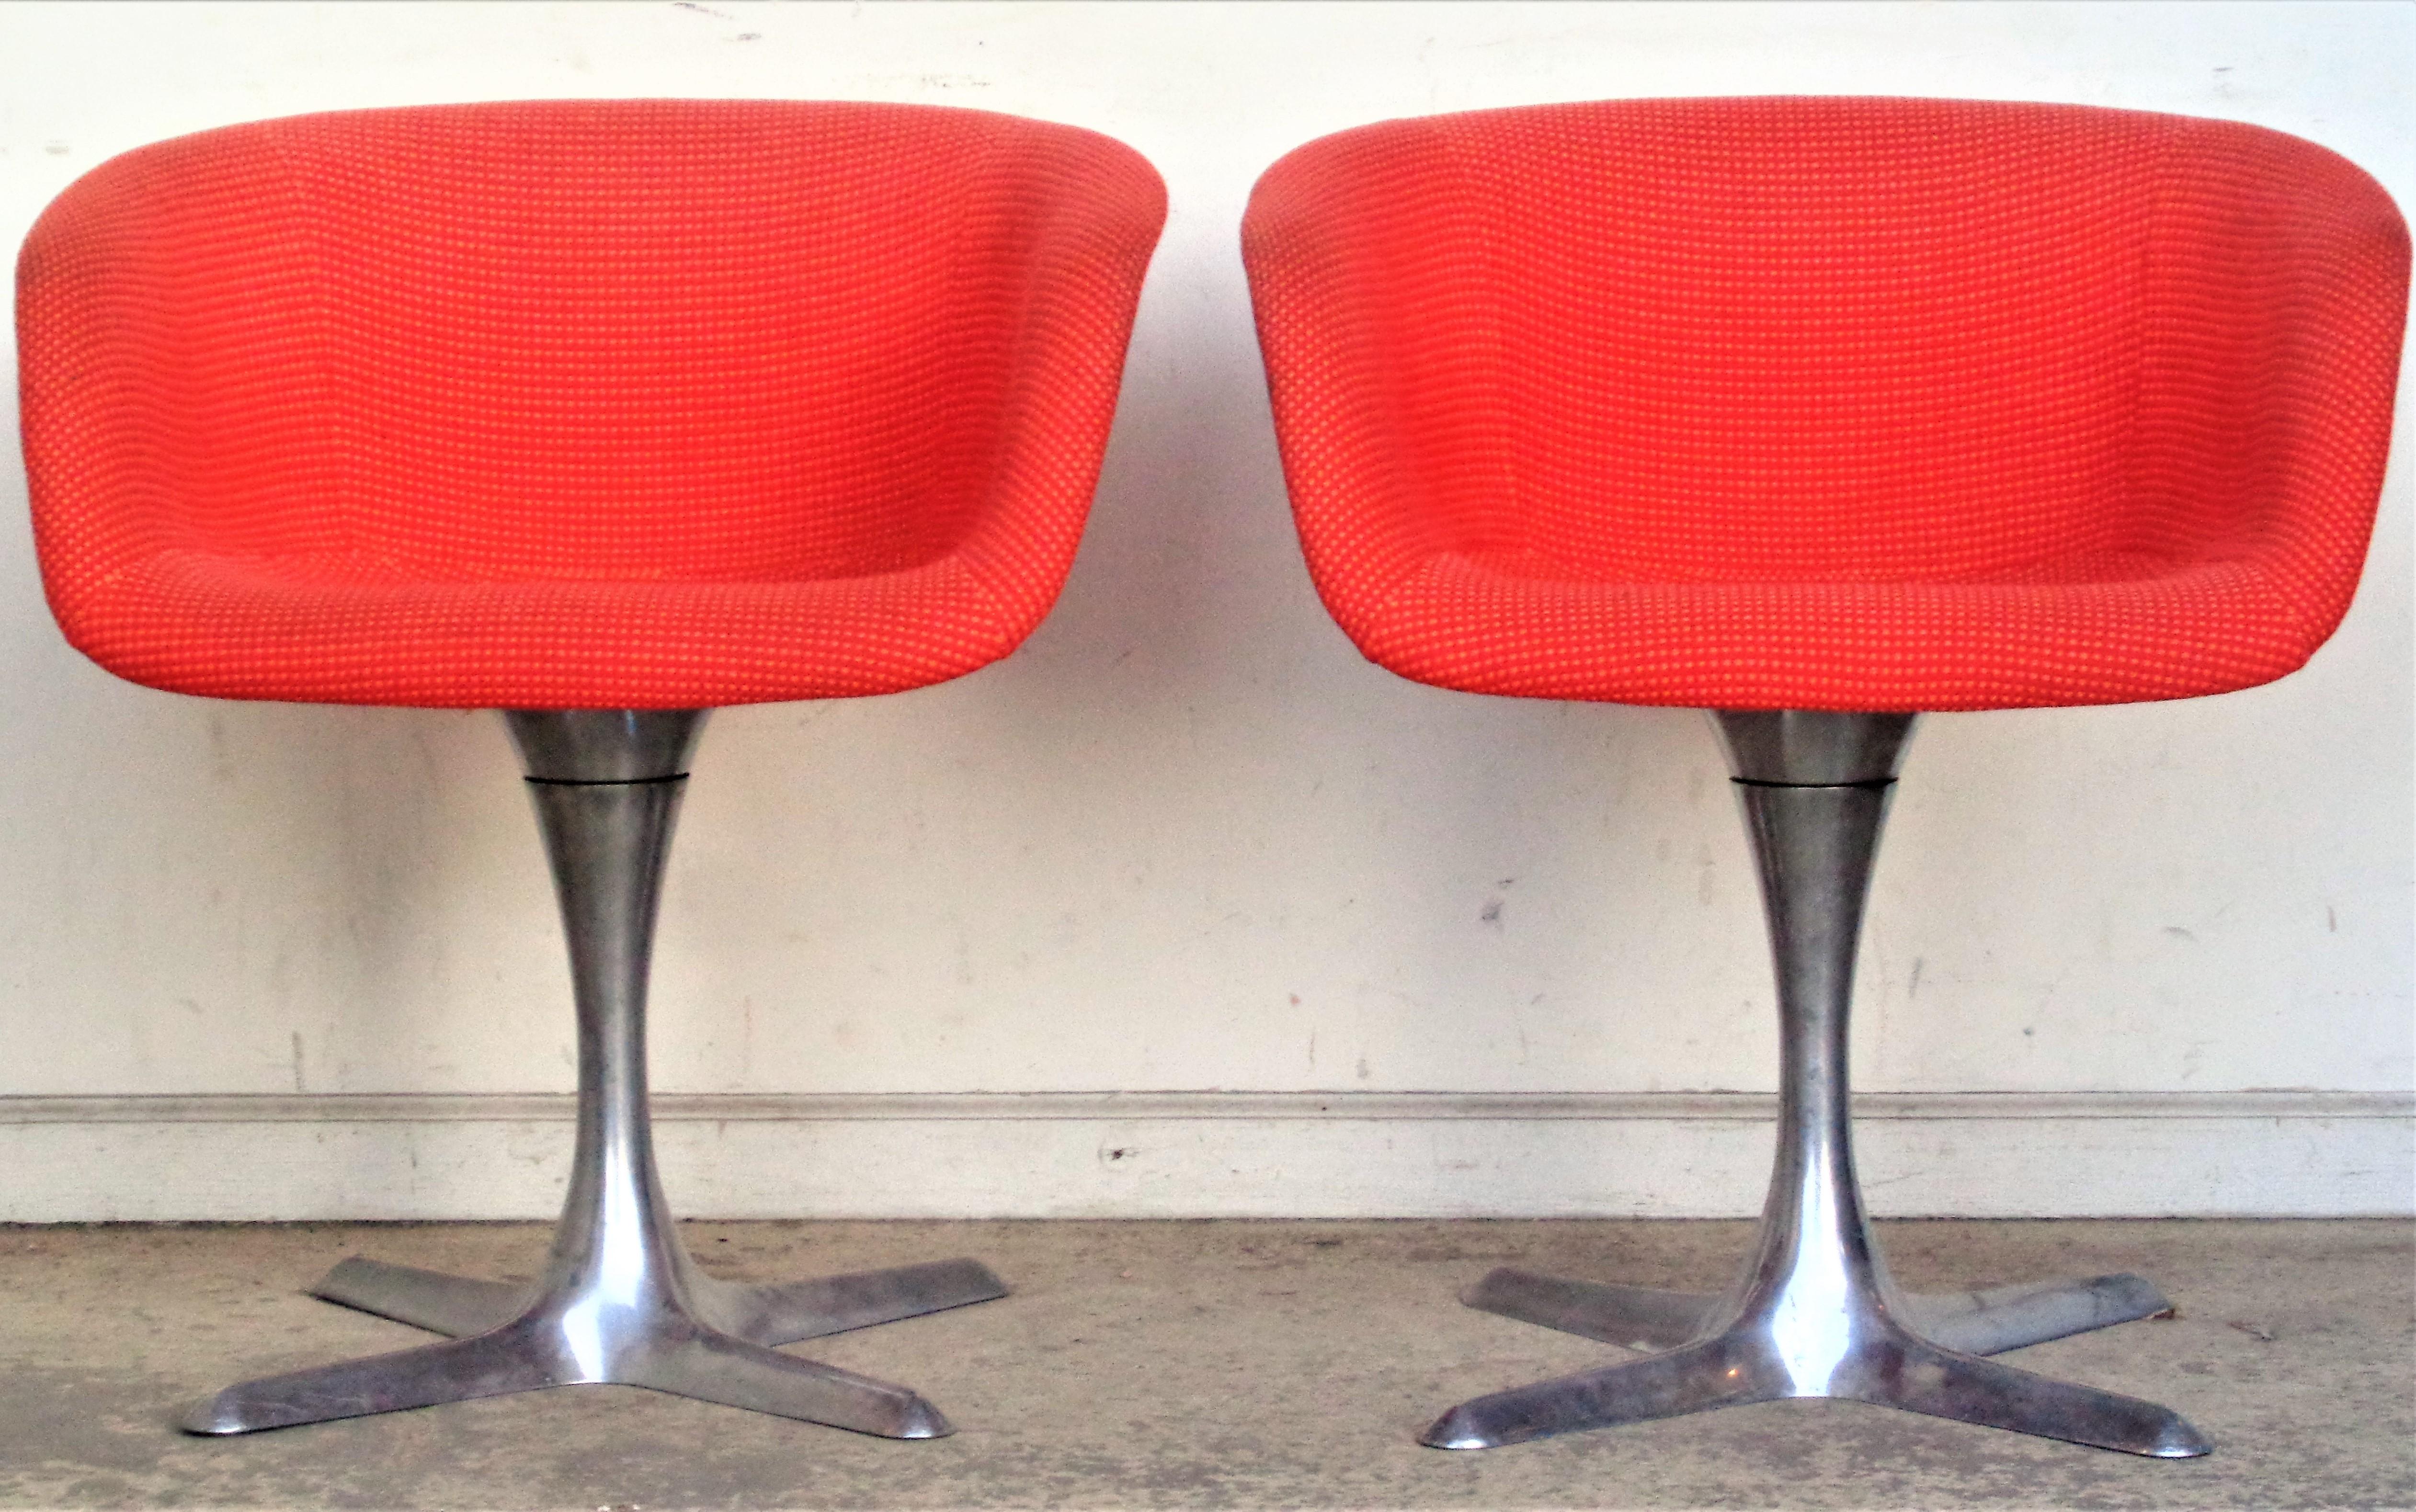 Pair of polished aluminum base swivel barrel chairs with a Knoll type contract grade two tone woven wool tweed upholstery. Designed by Hugh Acton for Burke-Acton ( see label on underside ) in all original vintage condition. A hard to find pair of